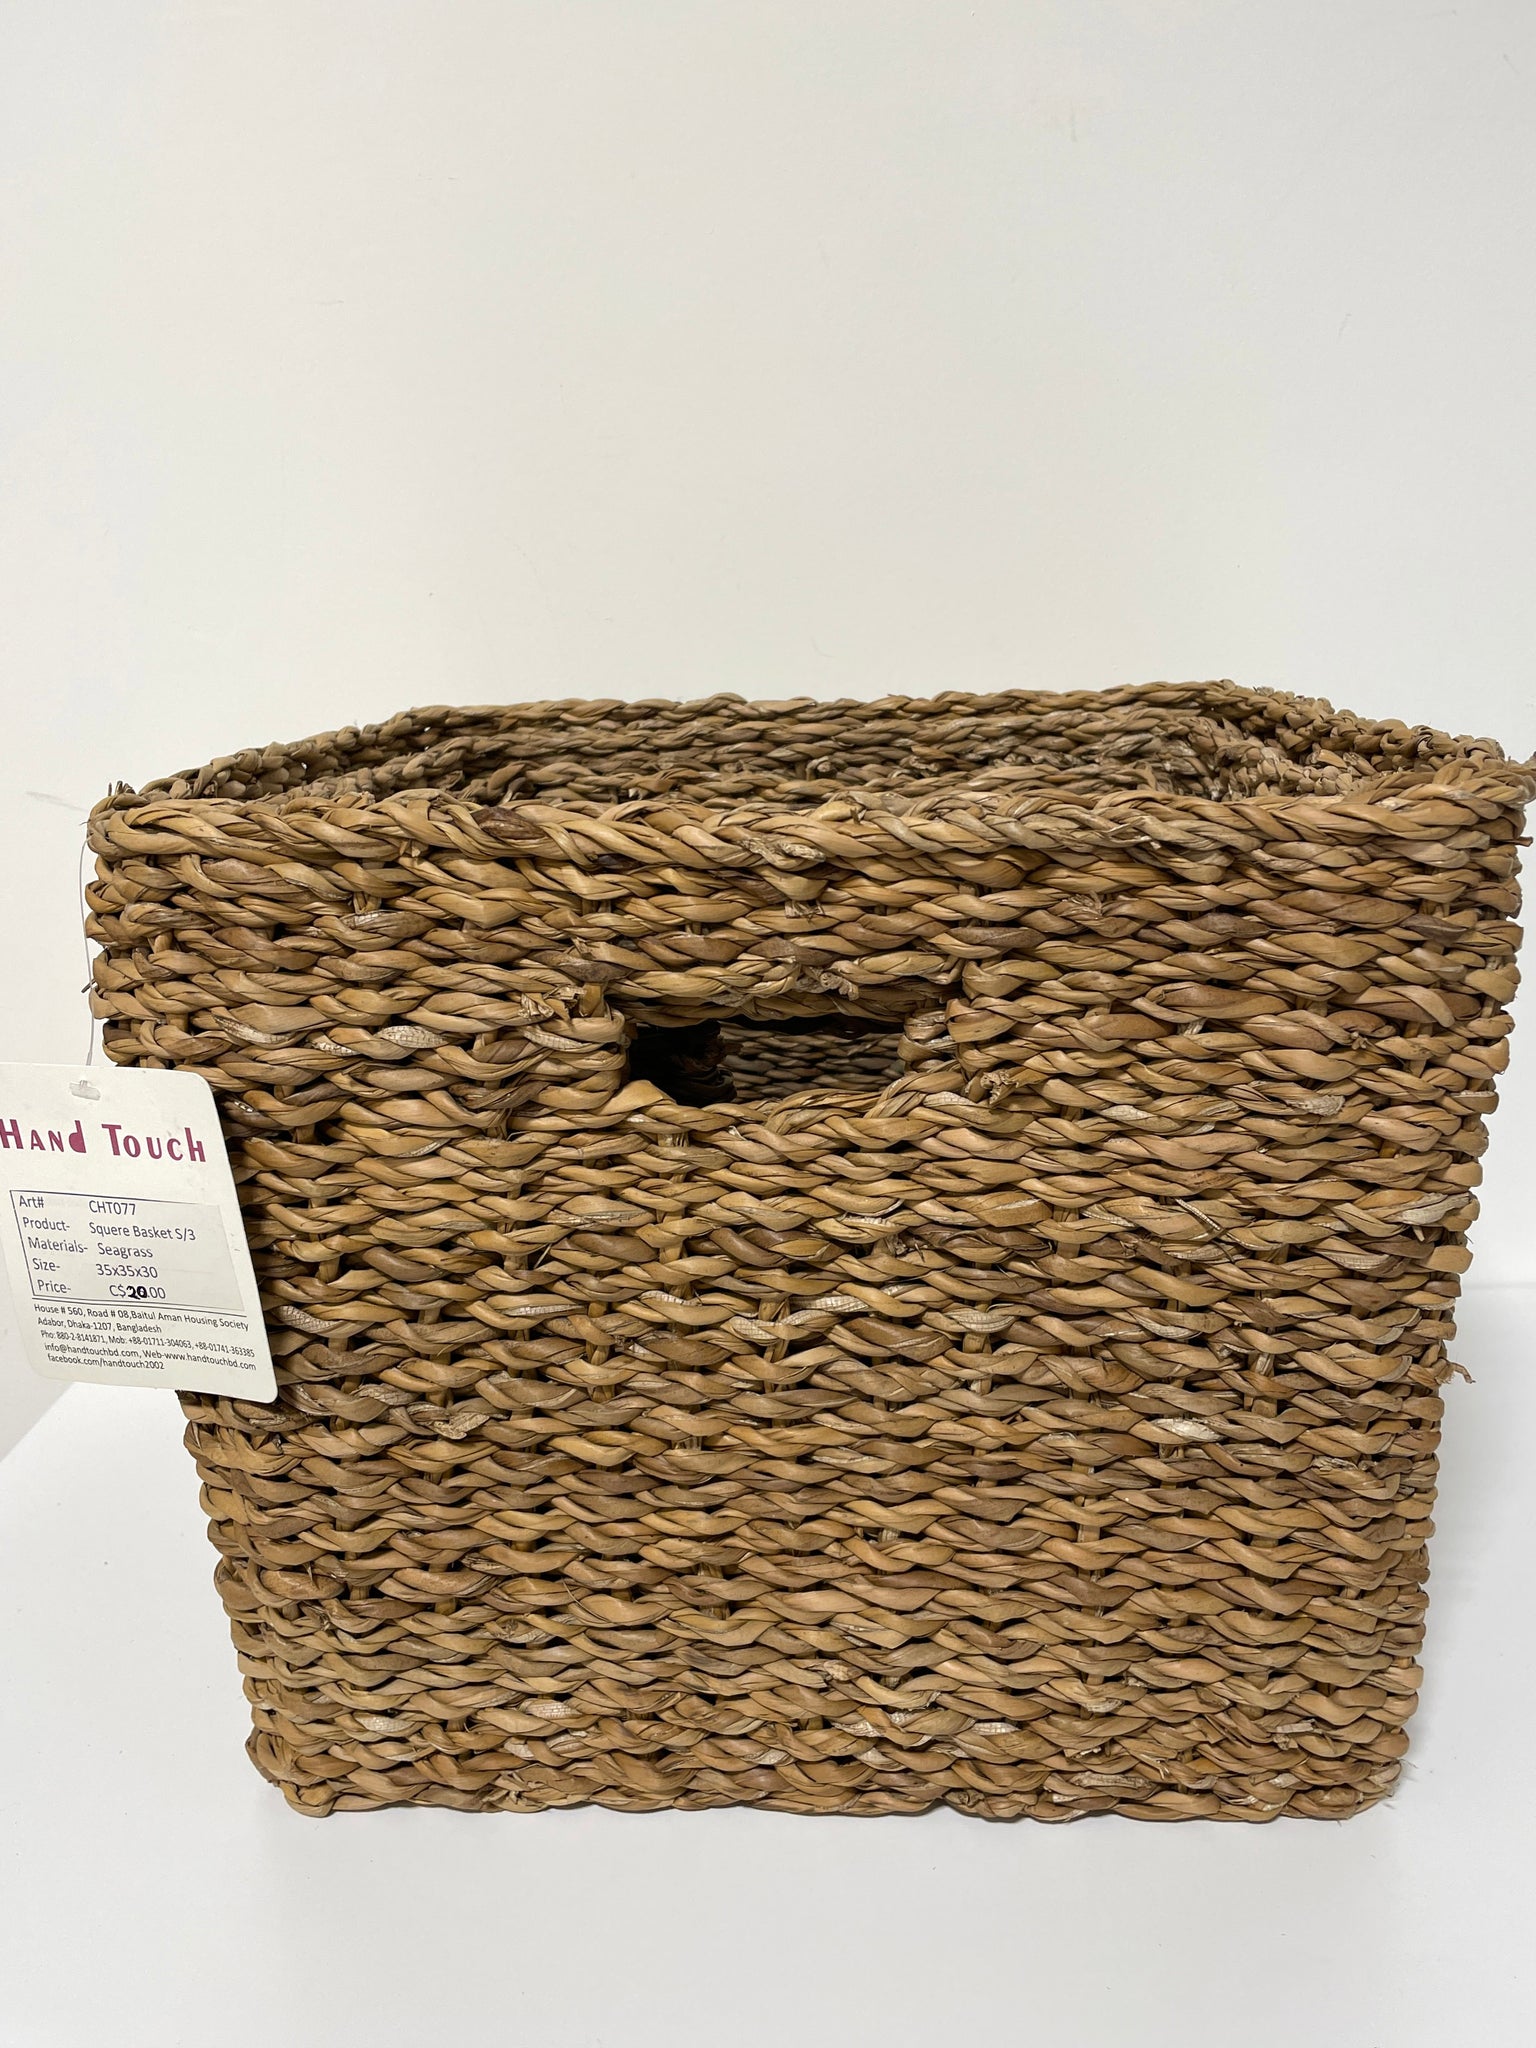 Seagrass Square Basket - Set of 3 - Hand Touch